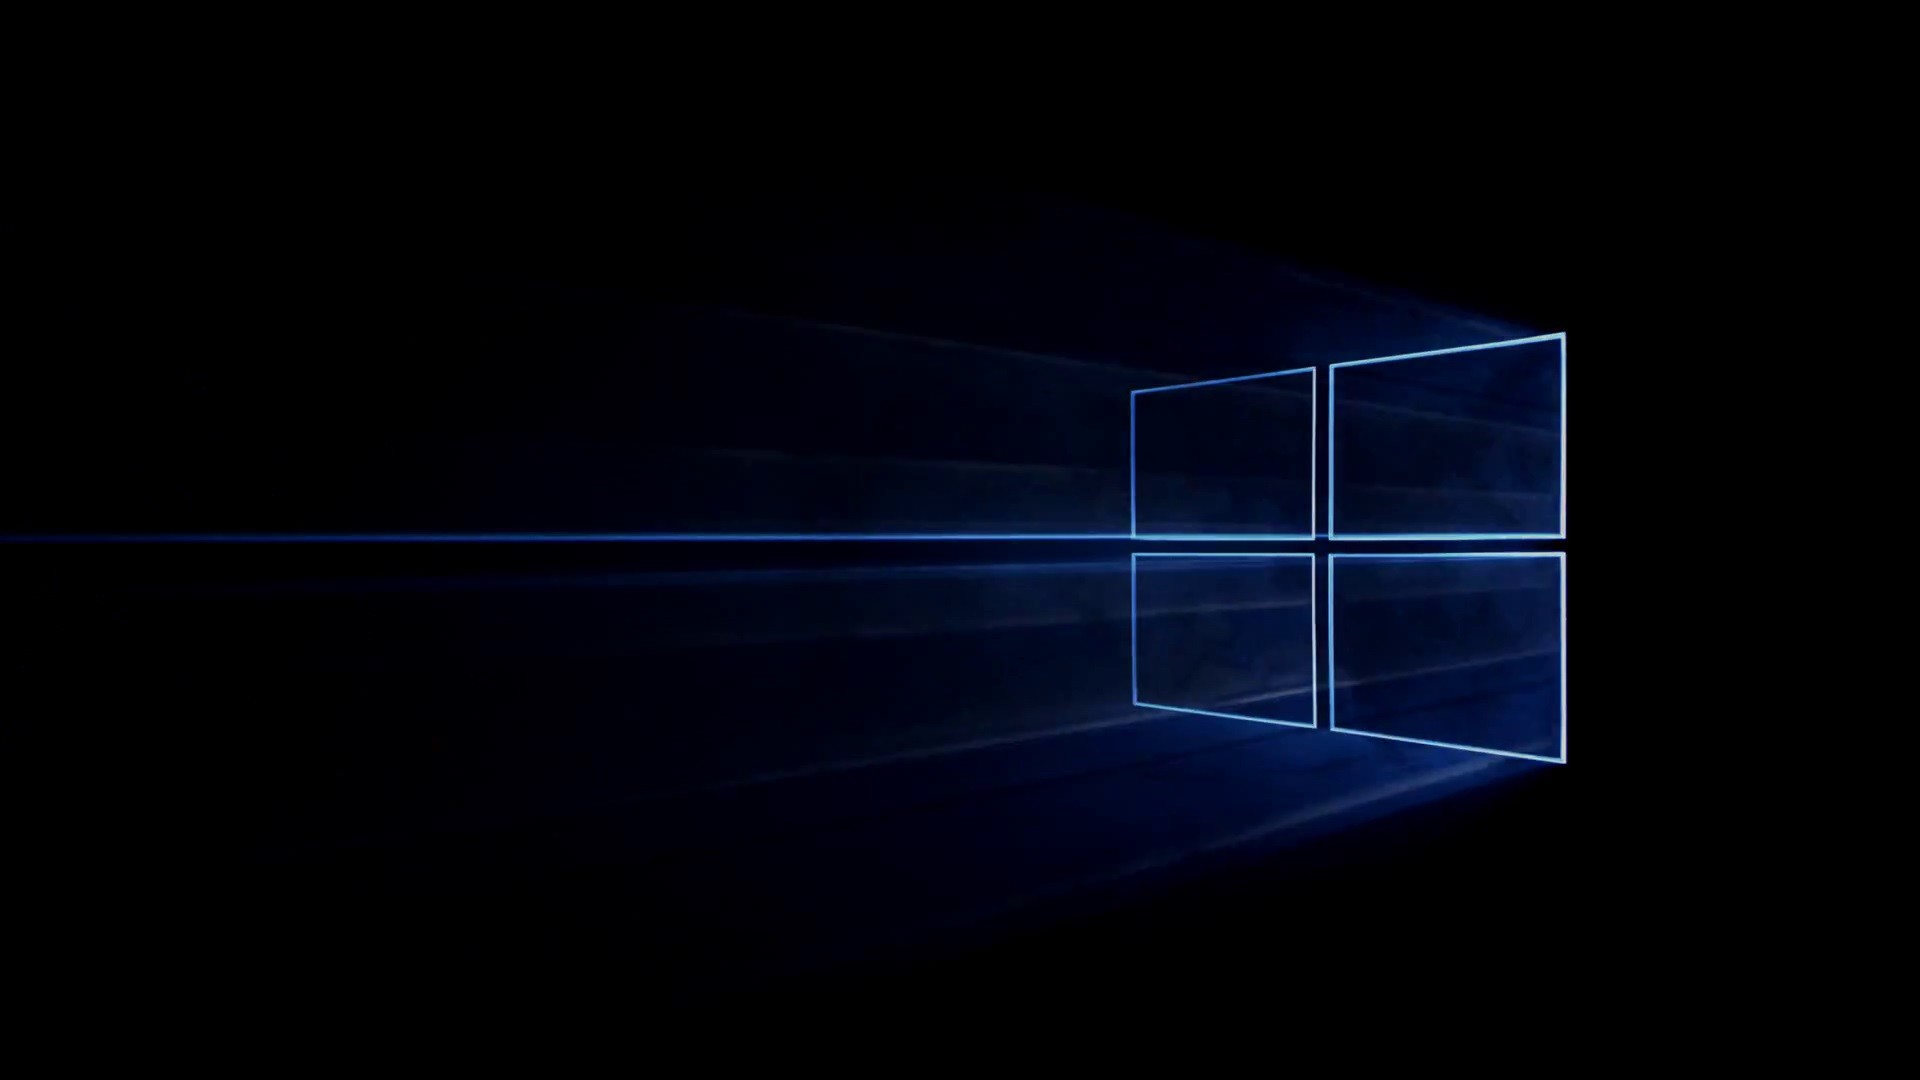 The hero wallpaper that will be included in Windows 10 RTM